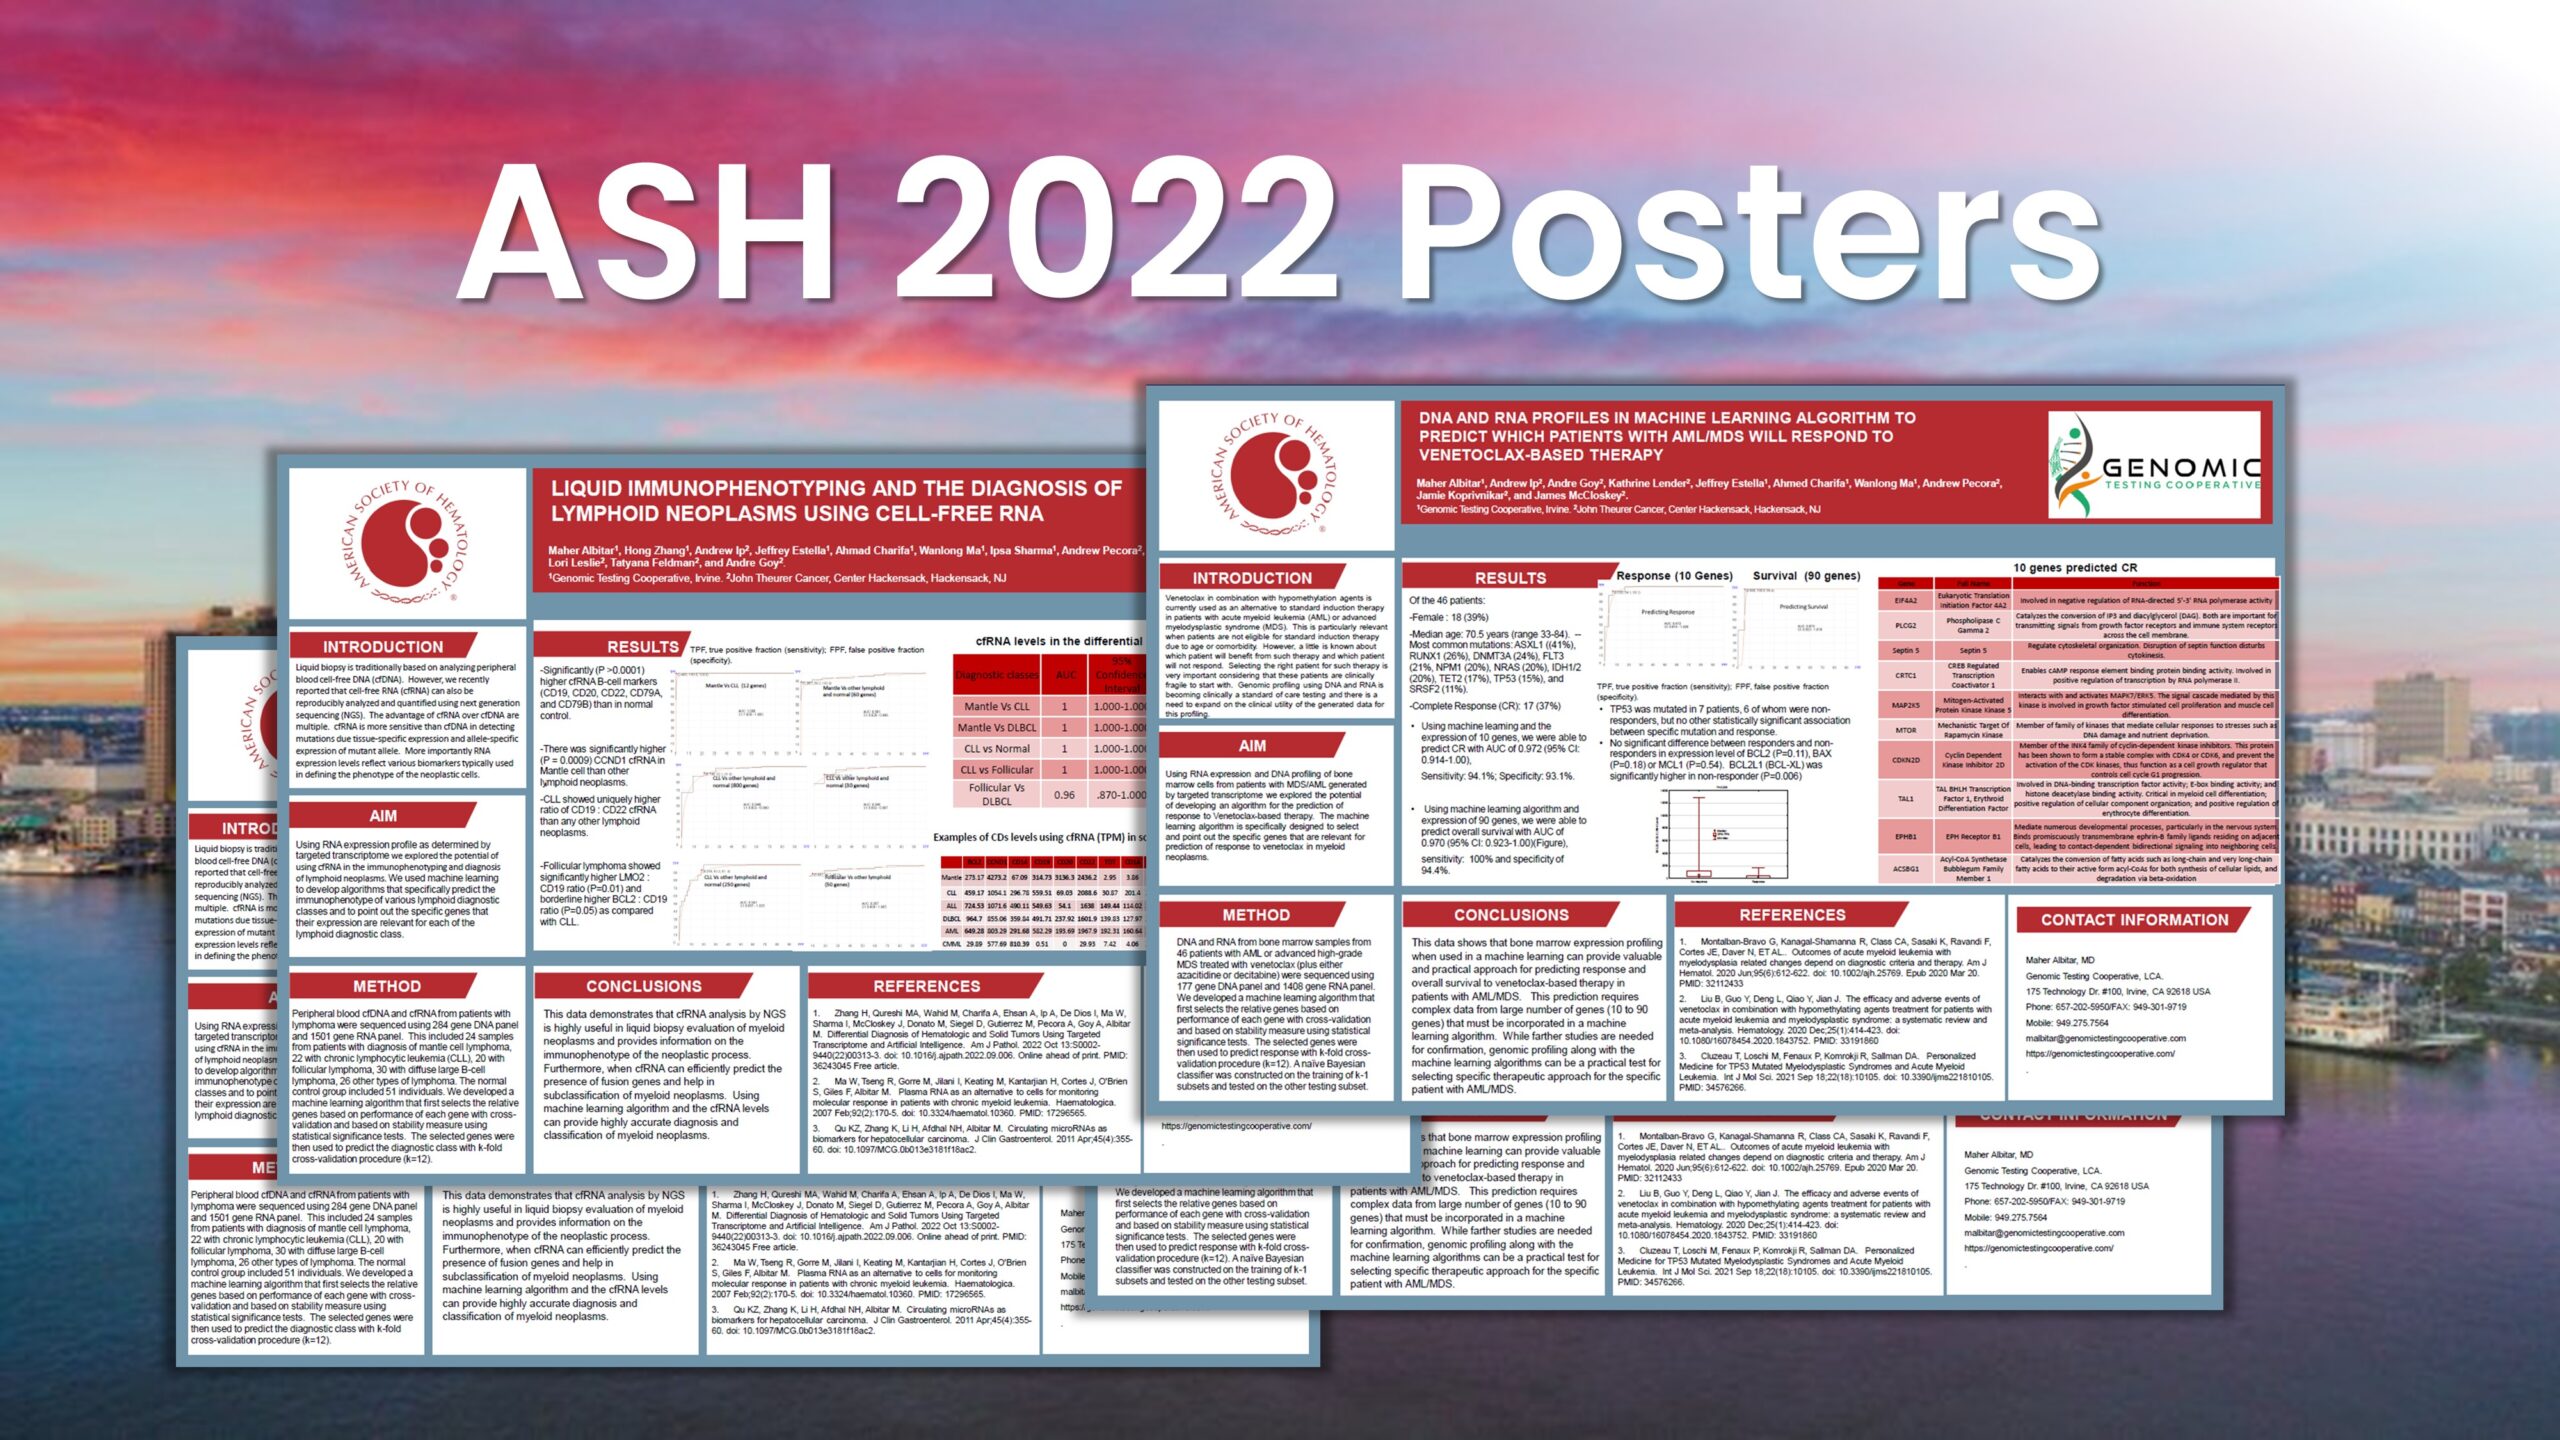 ASH22 Posters